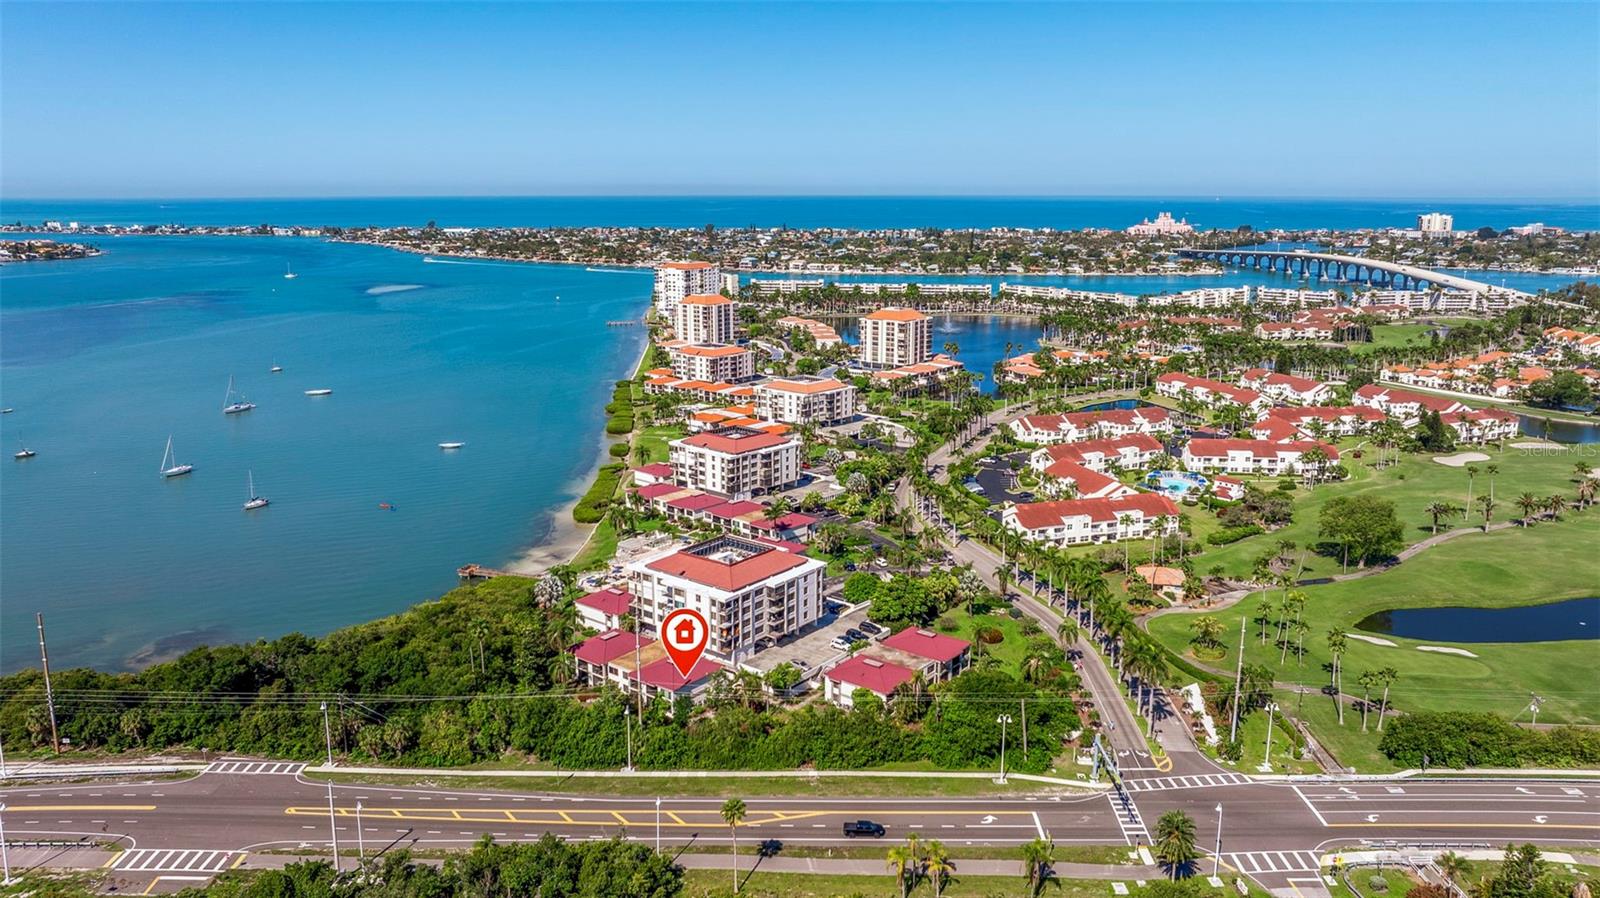 VIEWS OF BAHIA DEL MAR AND PALMA DEL MAR WHICH ARE LOCATED ON THE ISLA DEL SOL YACHT AND COUNTRY CLUB.  VARIOUS TYPES OF MEMBERSHIP FEES ARE REQUIRED TO JOIN THE CLUB..